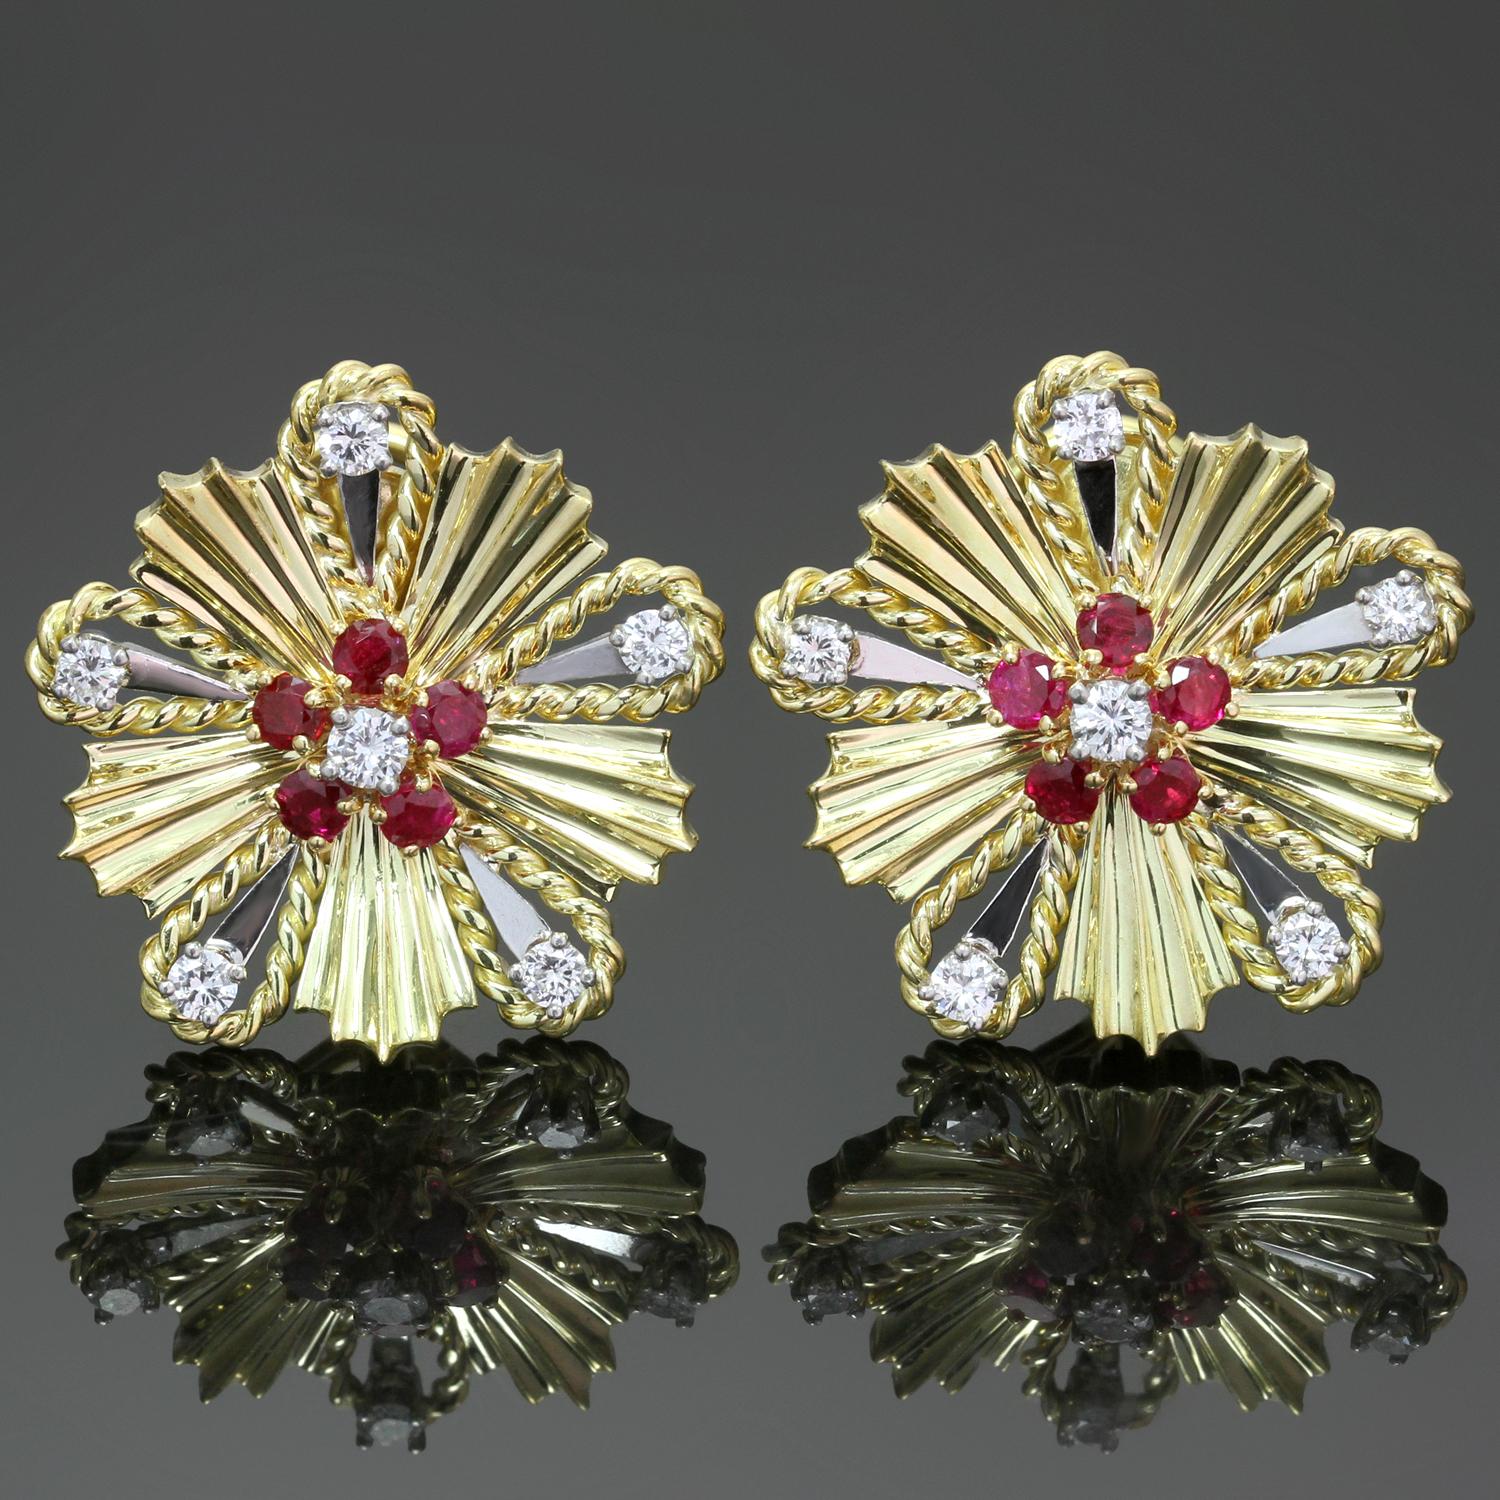 These gorgeous mid-20th century vintage Tiffany & Co. earrings feature an elegant starburst design crafted in 18k yellow gold and set with deep red sparkling rubies and brilliant-cut round F-G VS1-VS2 diamonds weighing an estimated 0.60 carats. Made